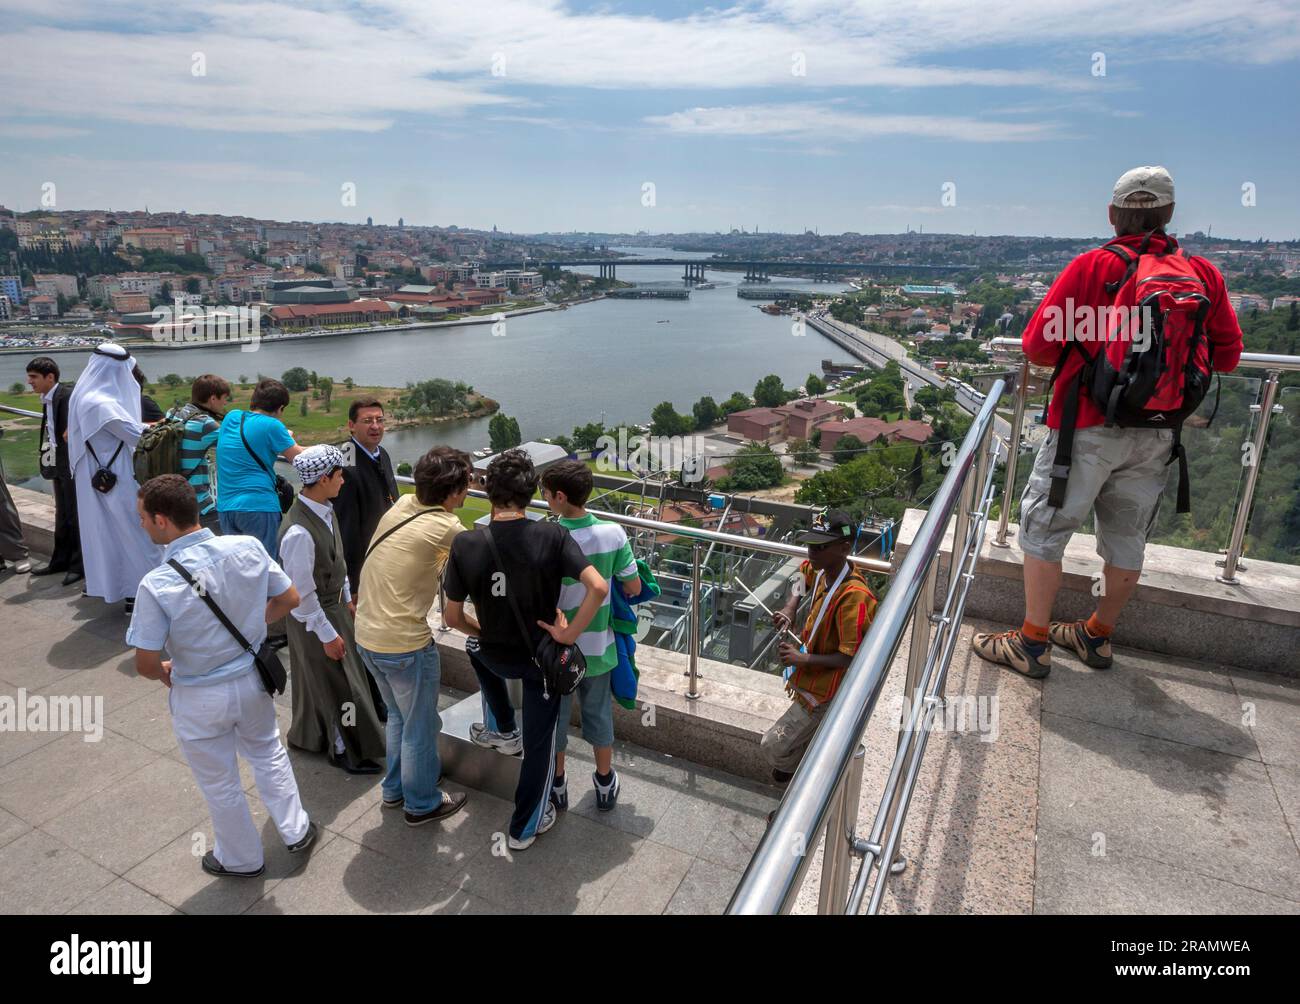 ISTANBUL, TURKIYE - JUNE 30, 2011 - Tourists stand on the viewing platform at Pierre Loti (Piyerloti) Hill which overlooks Golden Horn at Istanbul in Stock Photo